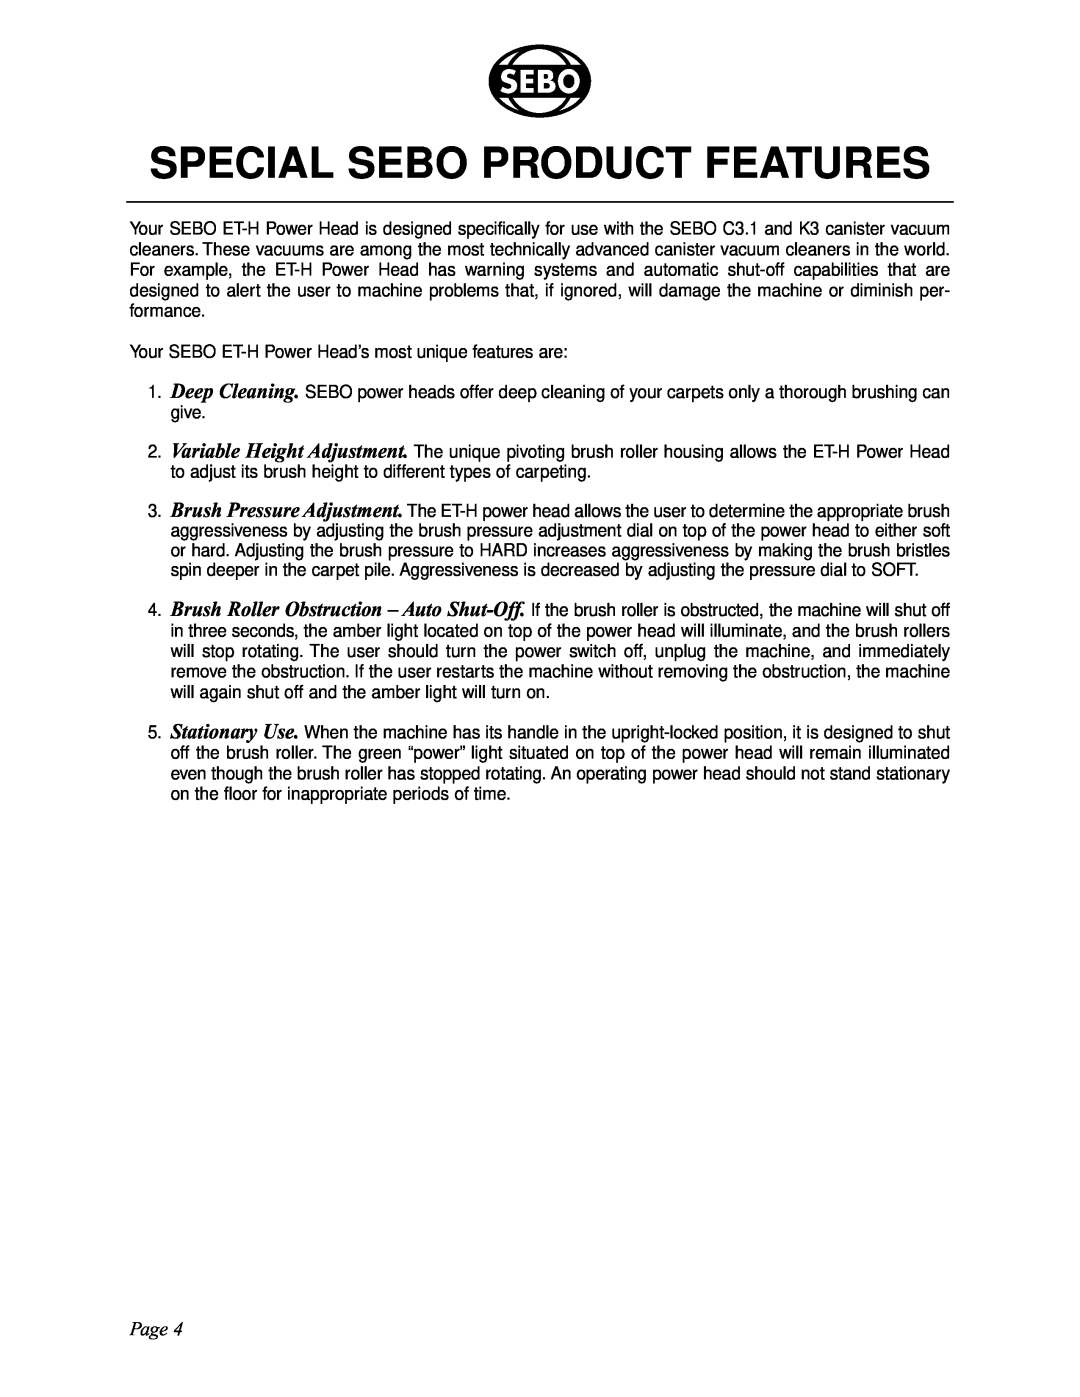 Sebo ET-H manual Special Sebo Product Features, Page 